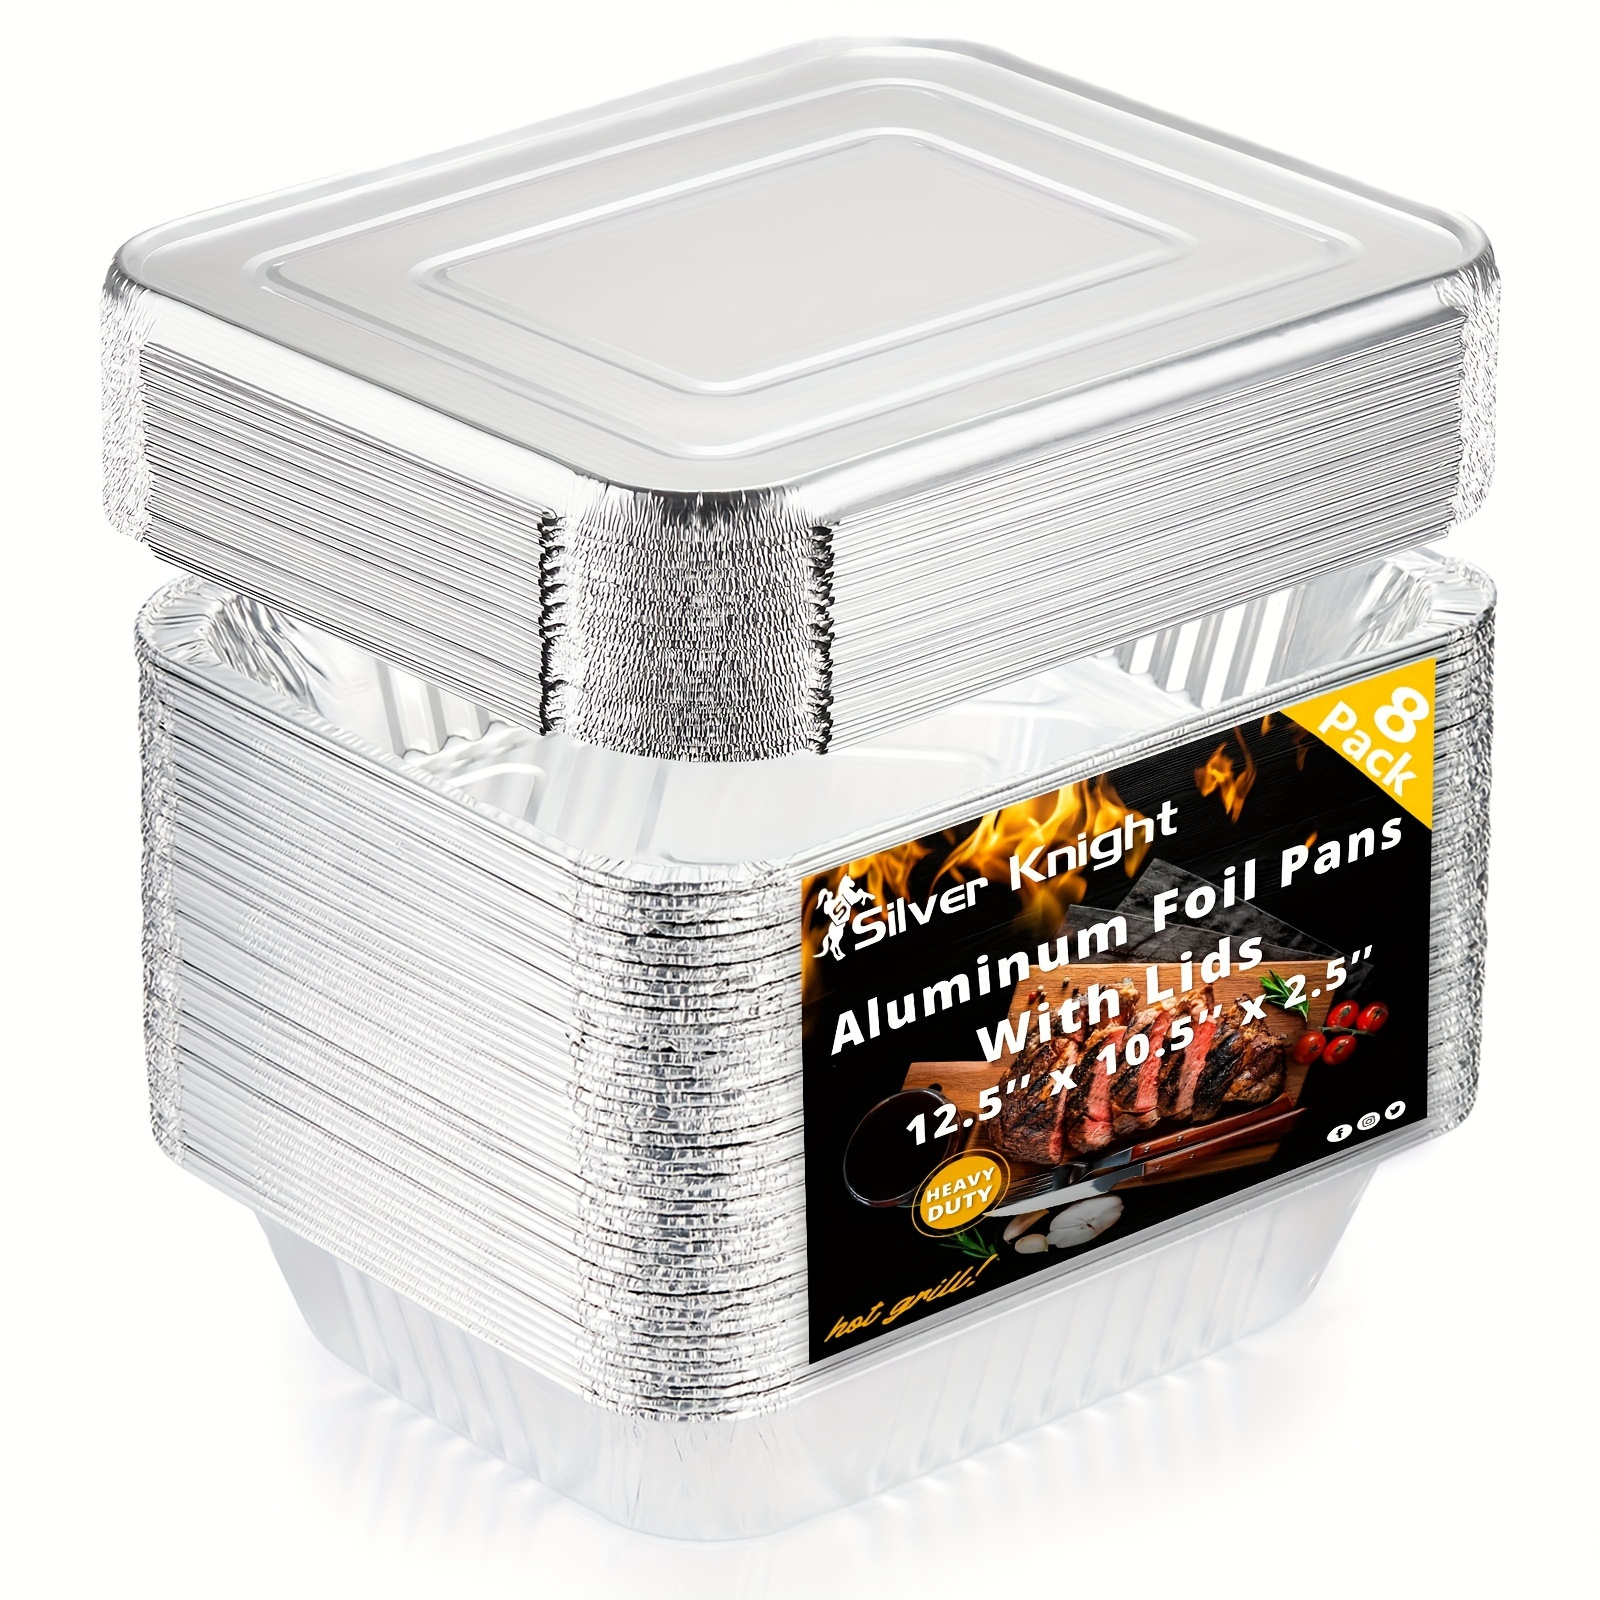 https://img.kwcdn.com/product/food-containers/d69d2f15w98k18-fea510f6/temu-avi/image-crop/804bc5fa-6632-47cf-a5da-5afb43c0eac3.jpg